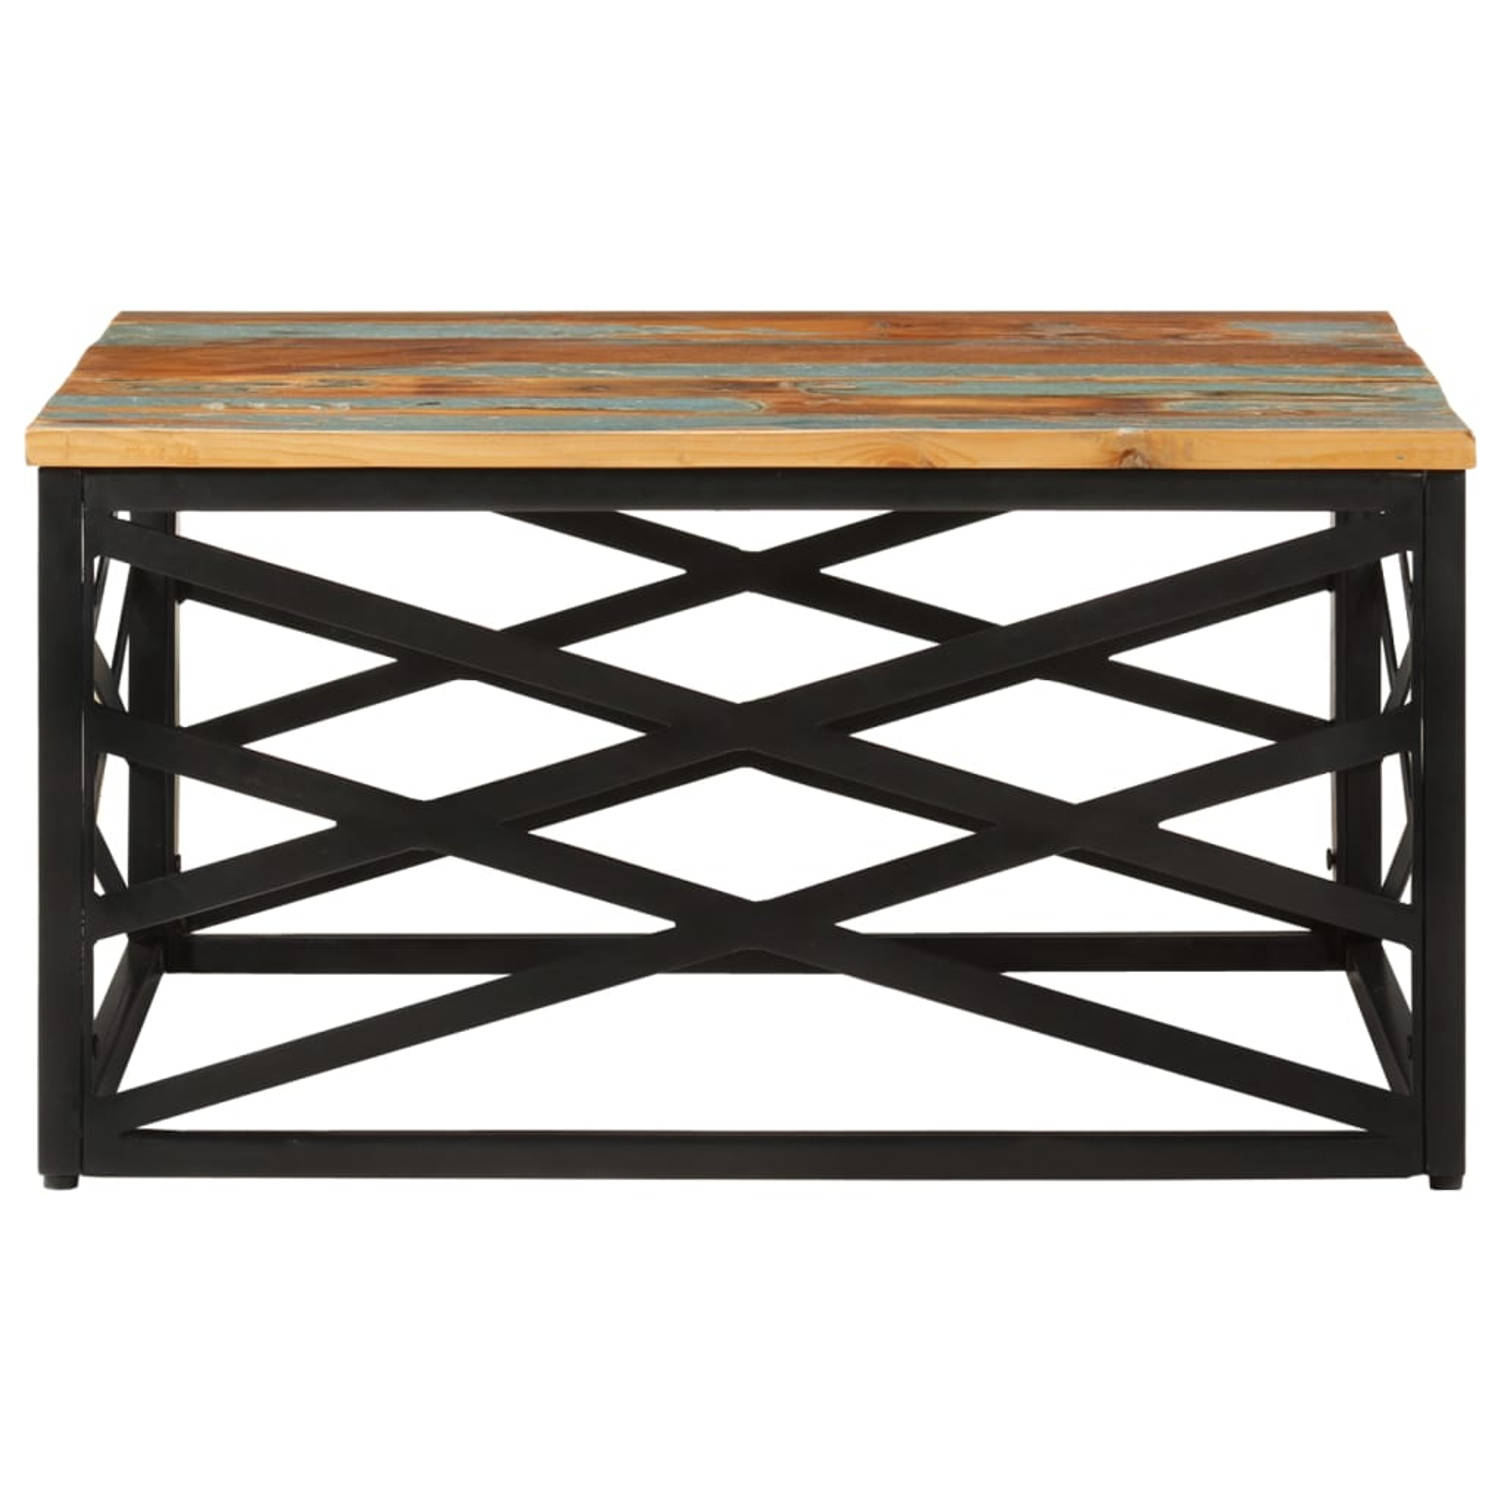 The Living Store Salontafel Industrial 68 x 68 x 35 cm Gerecycled Hout en Staal